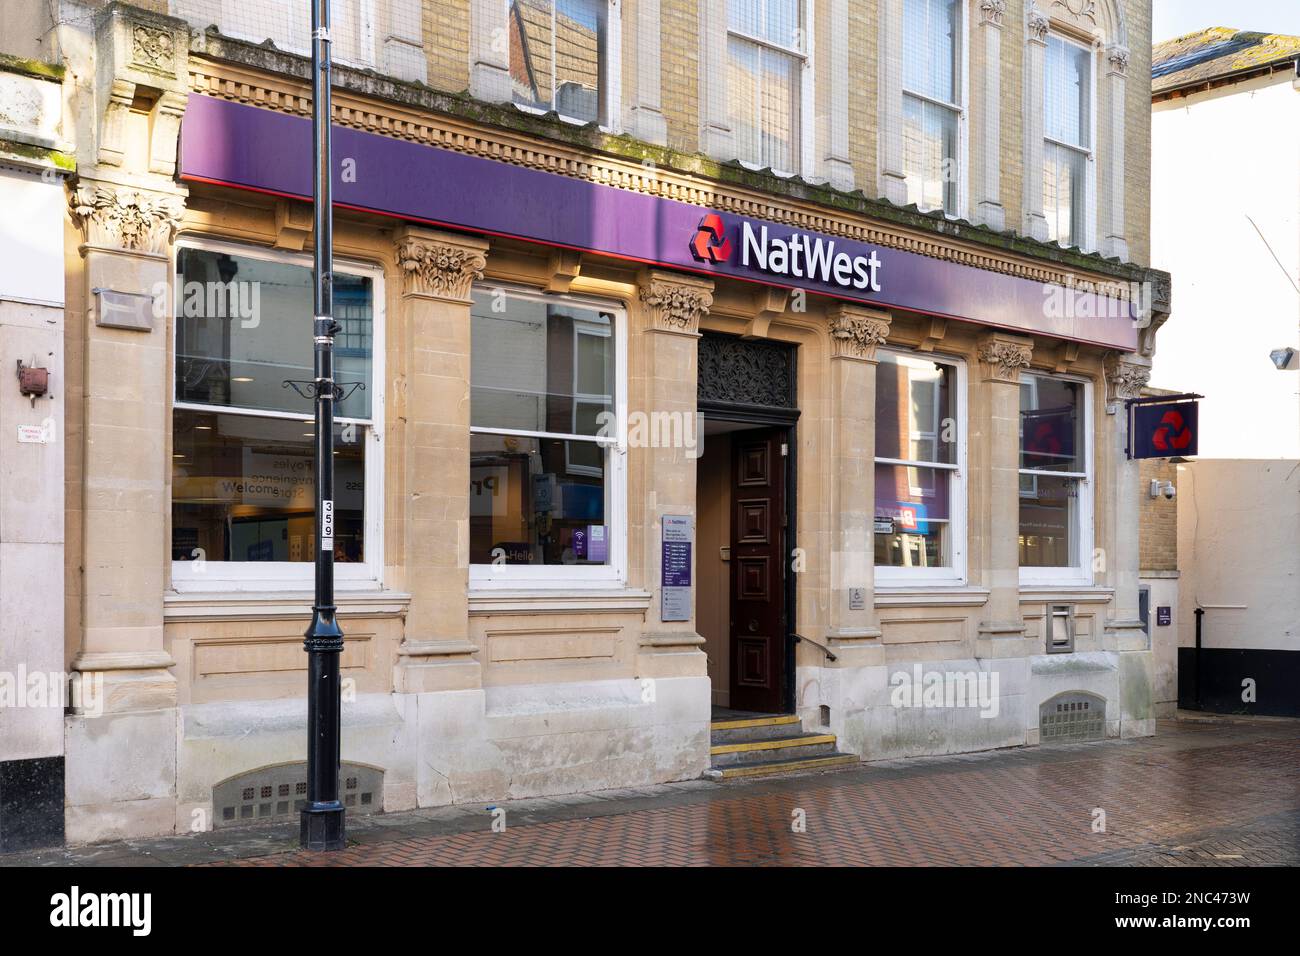 Natwest bank logo and title on the exterior of a high street branch in Basingstoke, UK. Concept: UK banking industry, financial services Stock Photo